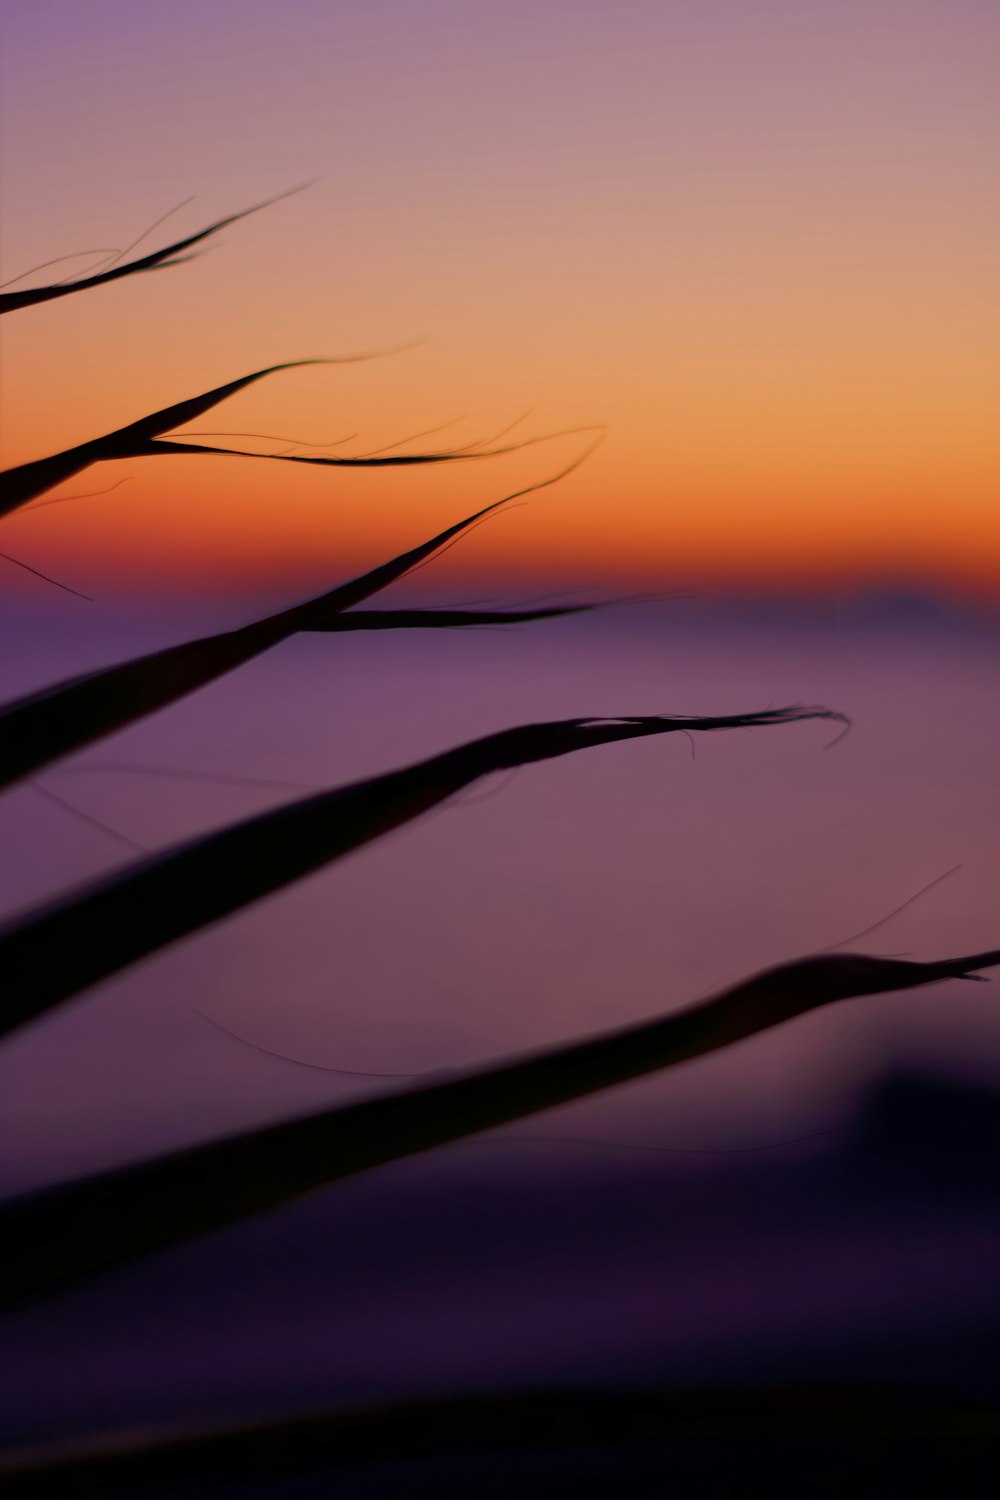 a close up of a plant with a sunset in the background